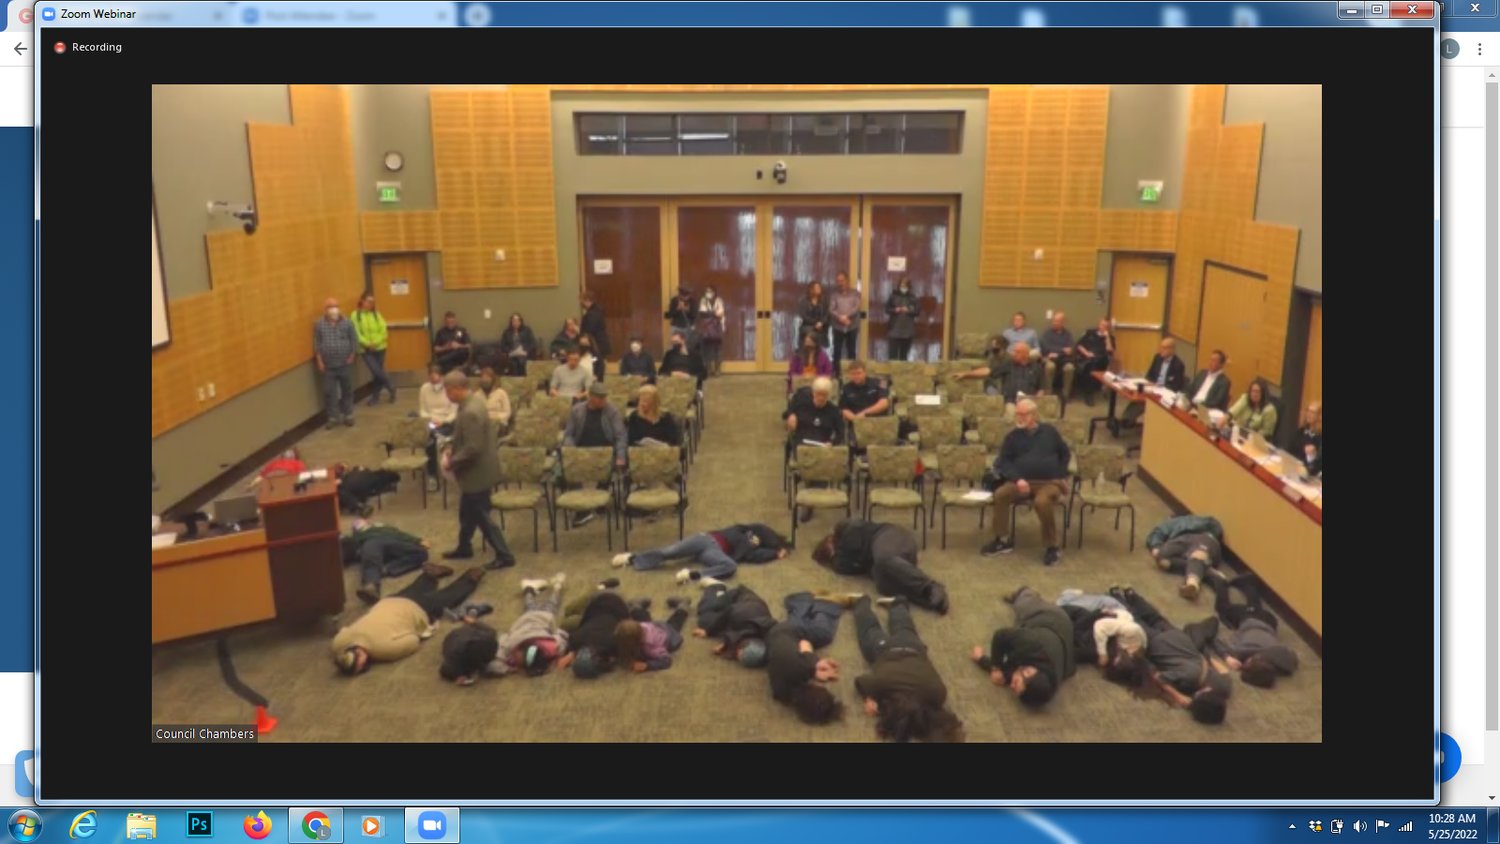 The youth laid still on the floor throughout the public comment segment.